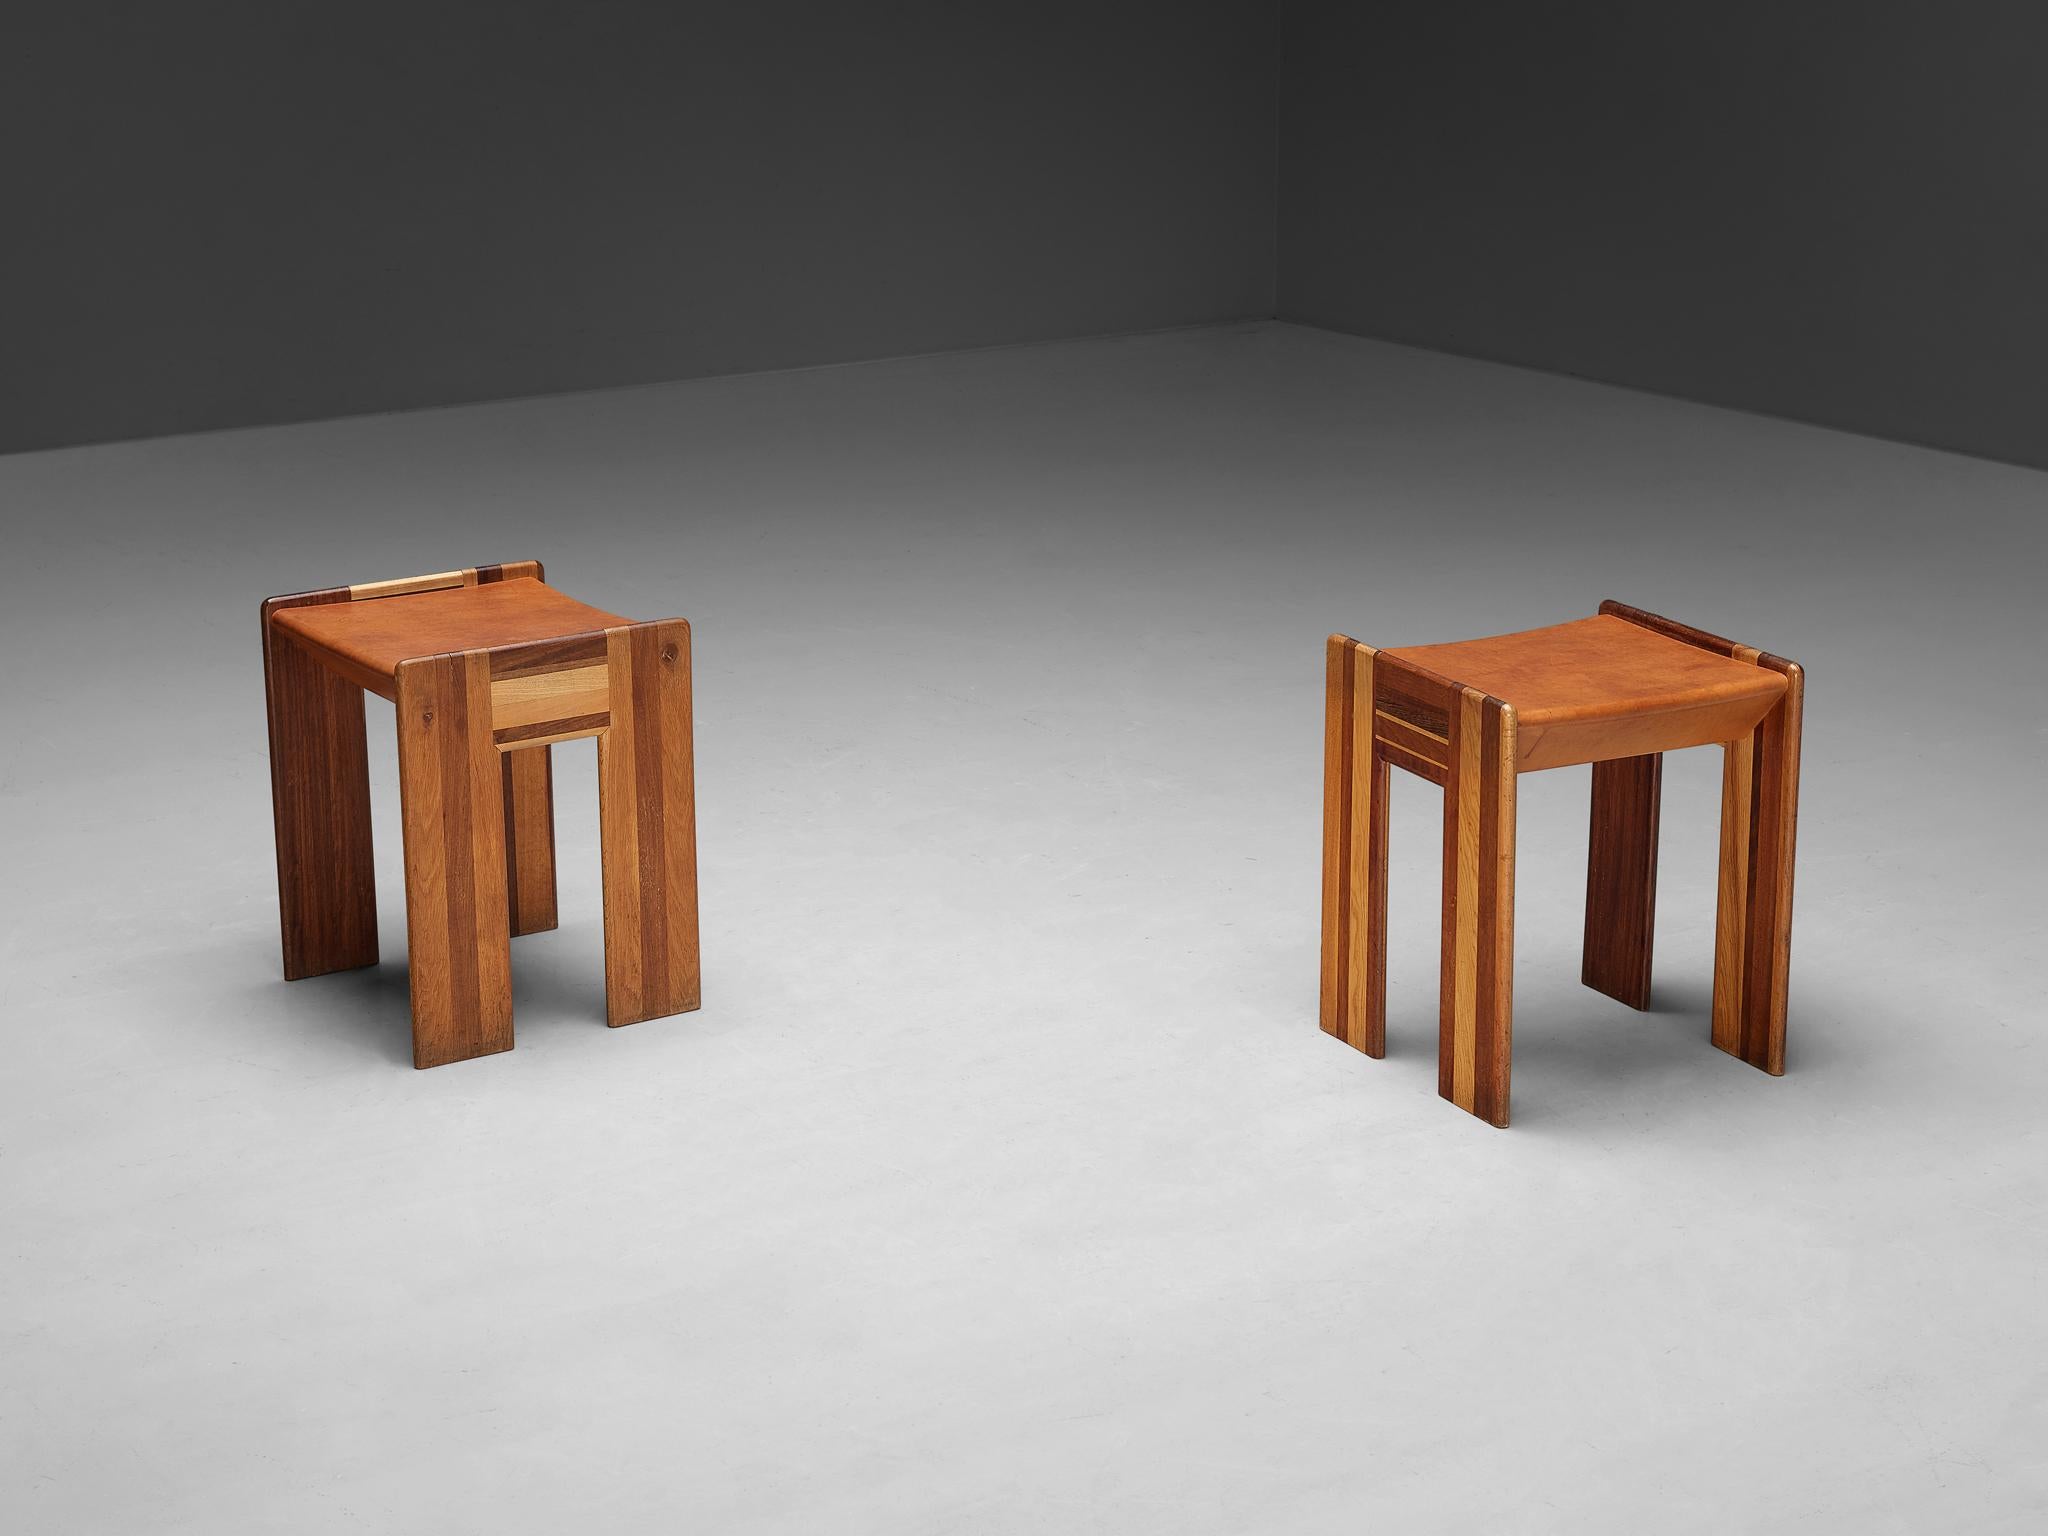 Afra & Tobia Scarpa 'Benetton' Stools in Mixed Wood and Cognac Leather For Sale 1